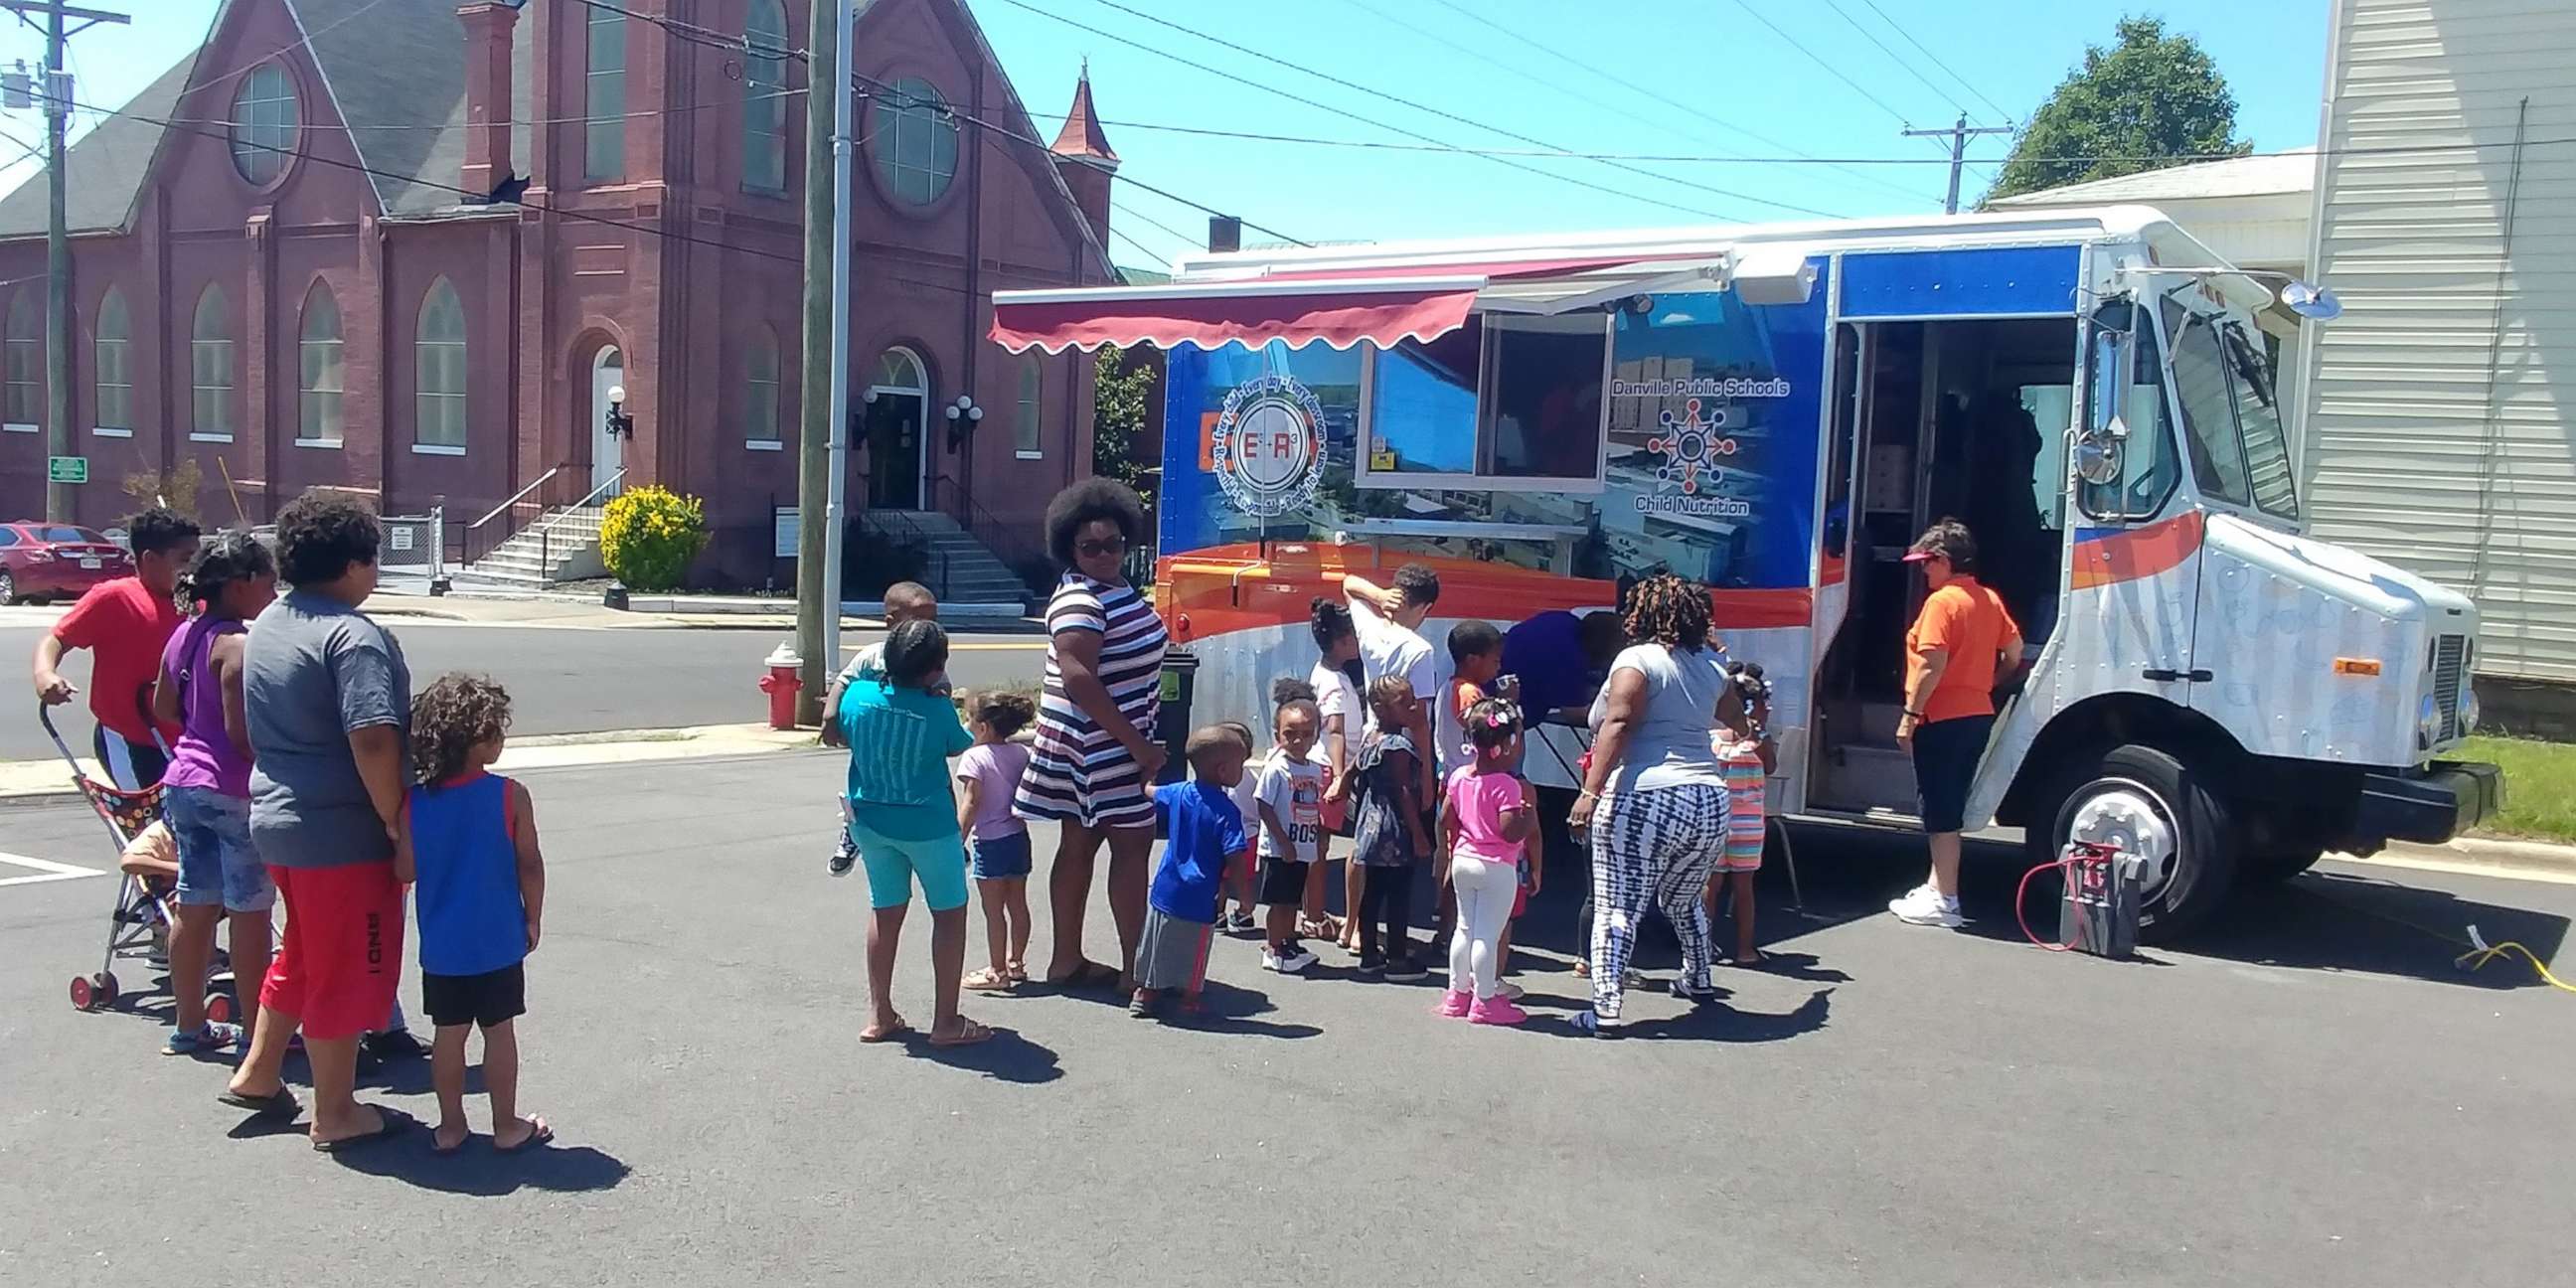 PHOTO: Students line up to a food truck providing free meals by Danville Public Schools in Virginia, June 11, 2019. 